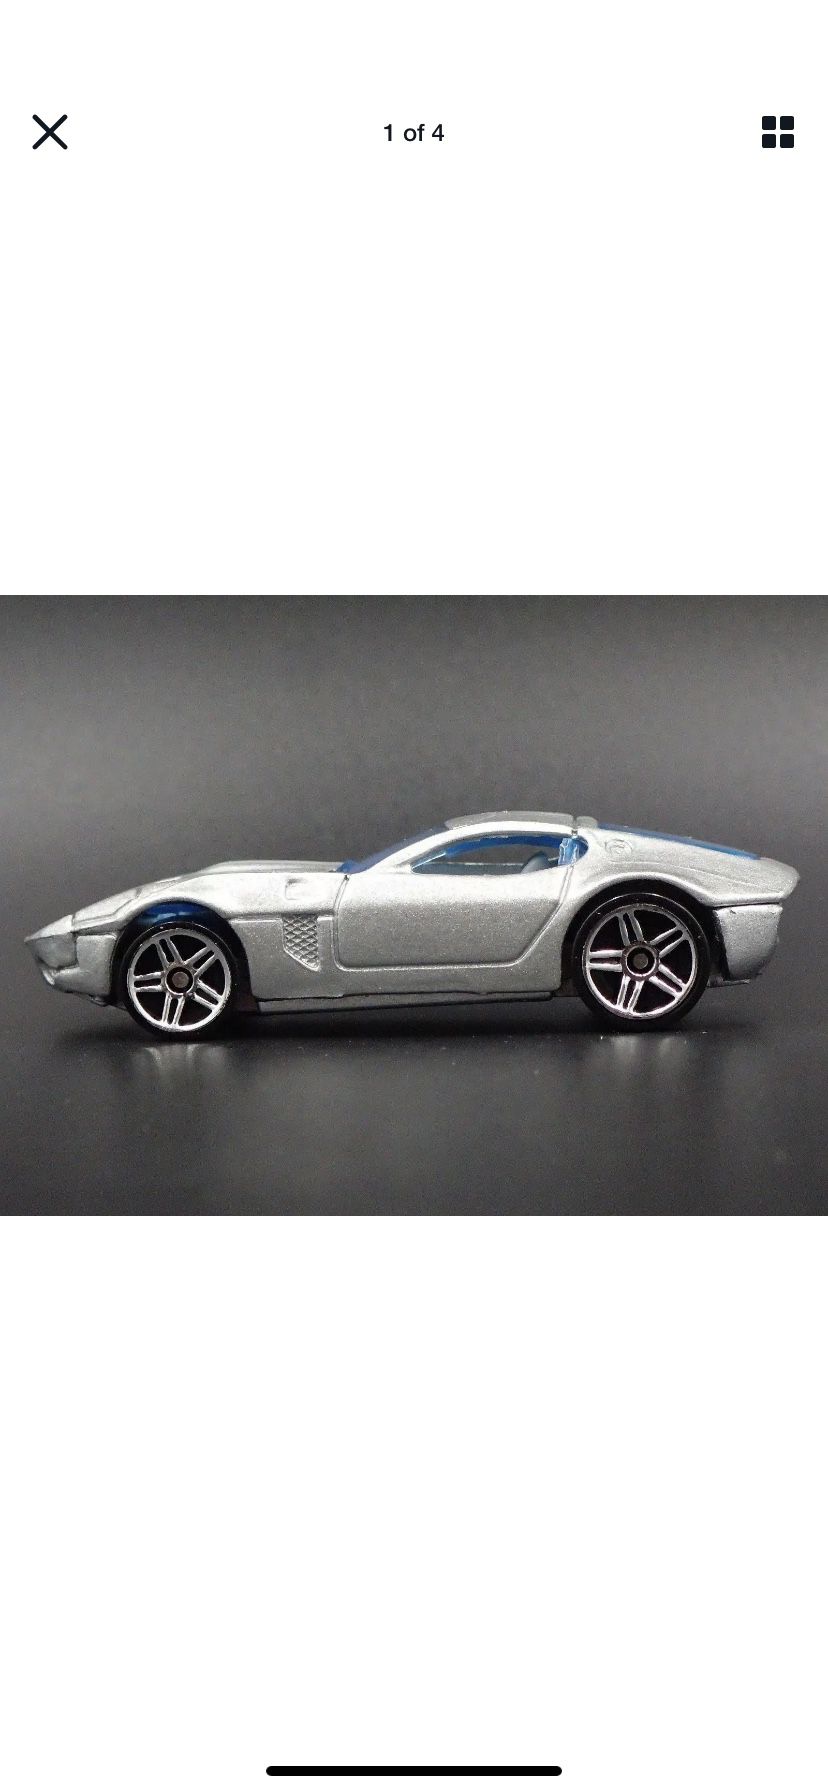 2005 FORD SHELBY GR-1 CONCEPT RARE 1:64